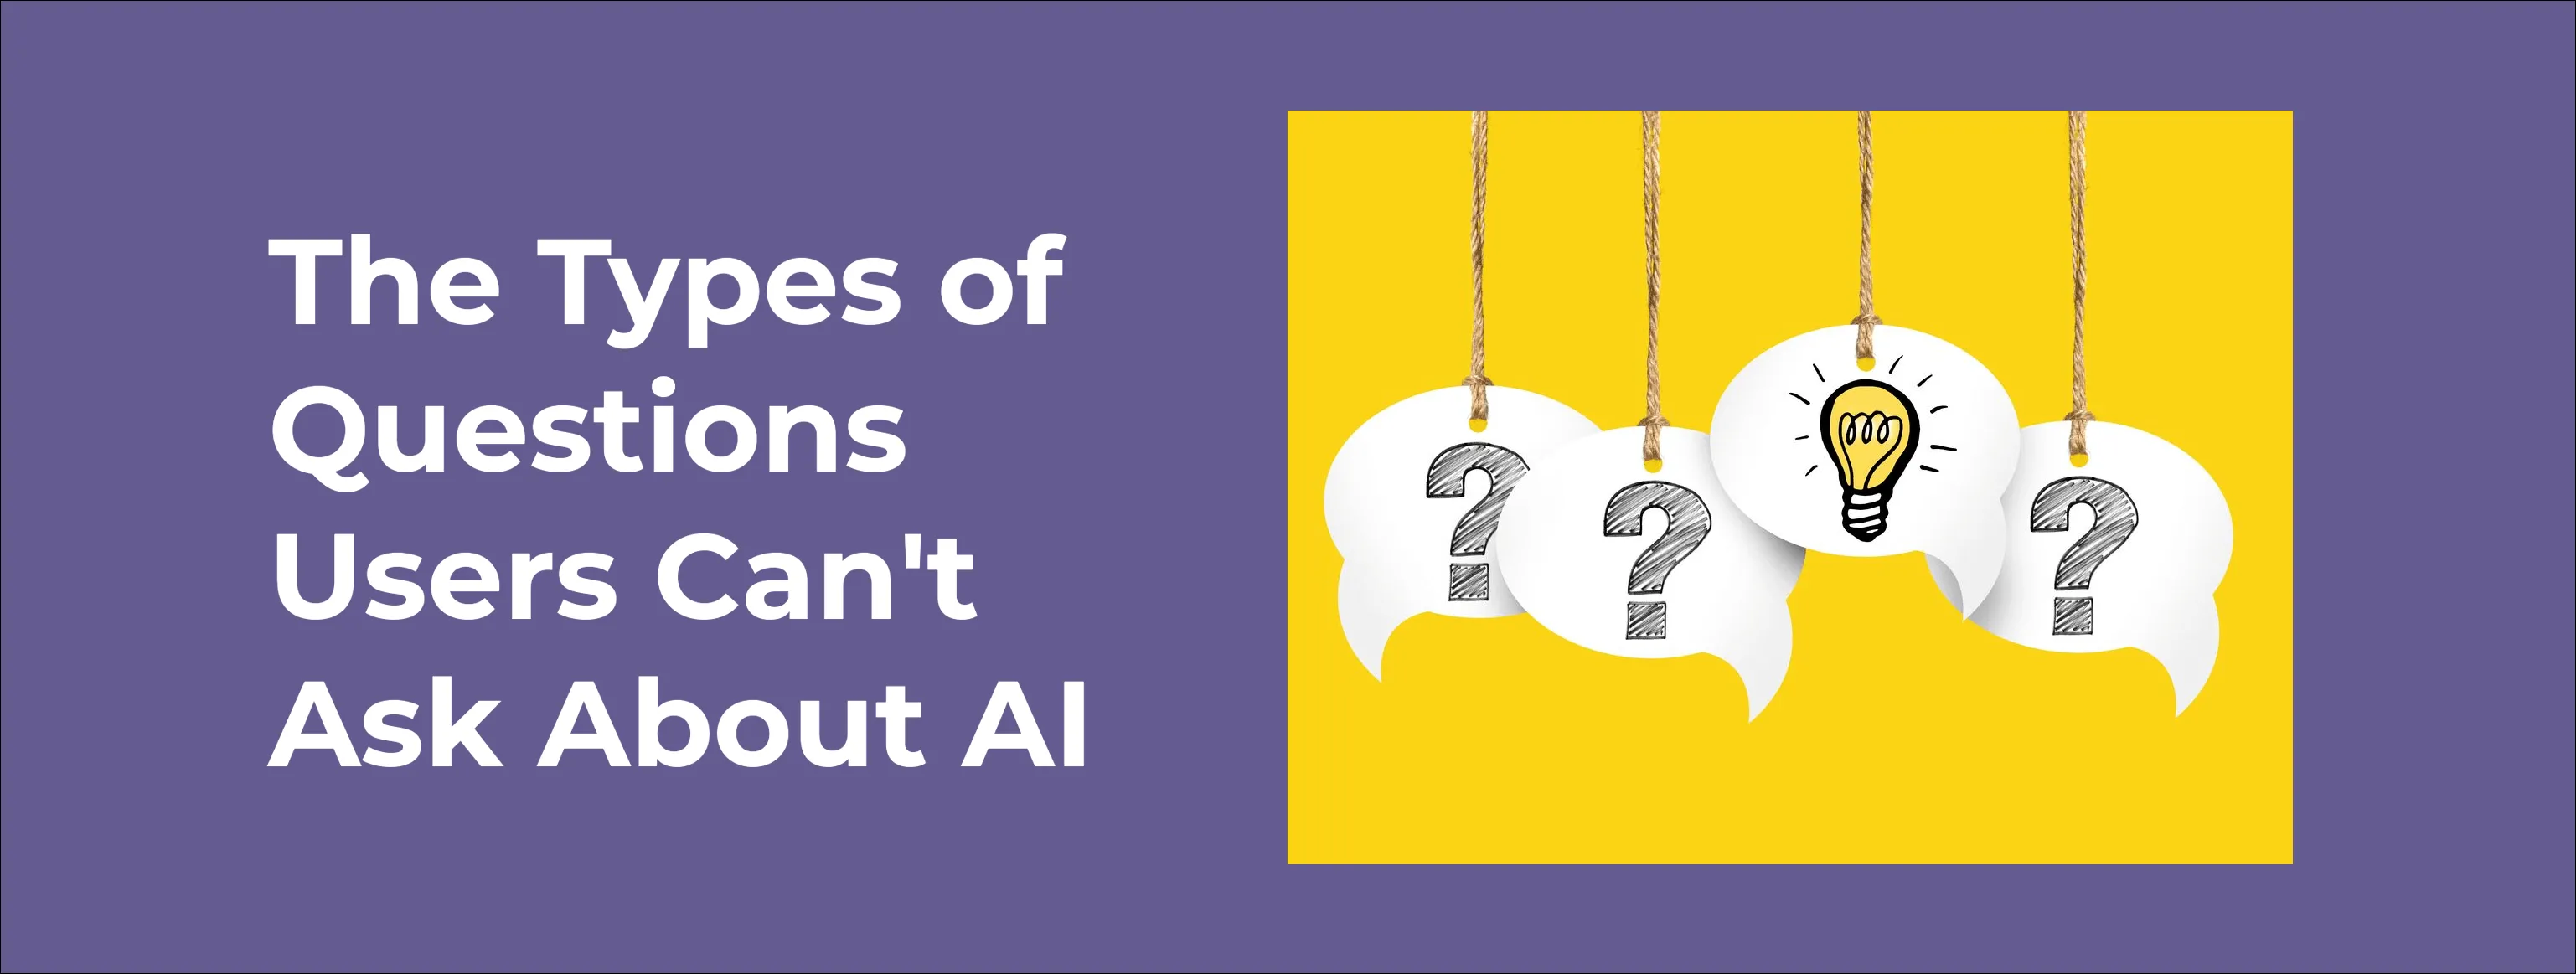 the types of questions that users cannot ask about ai